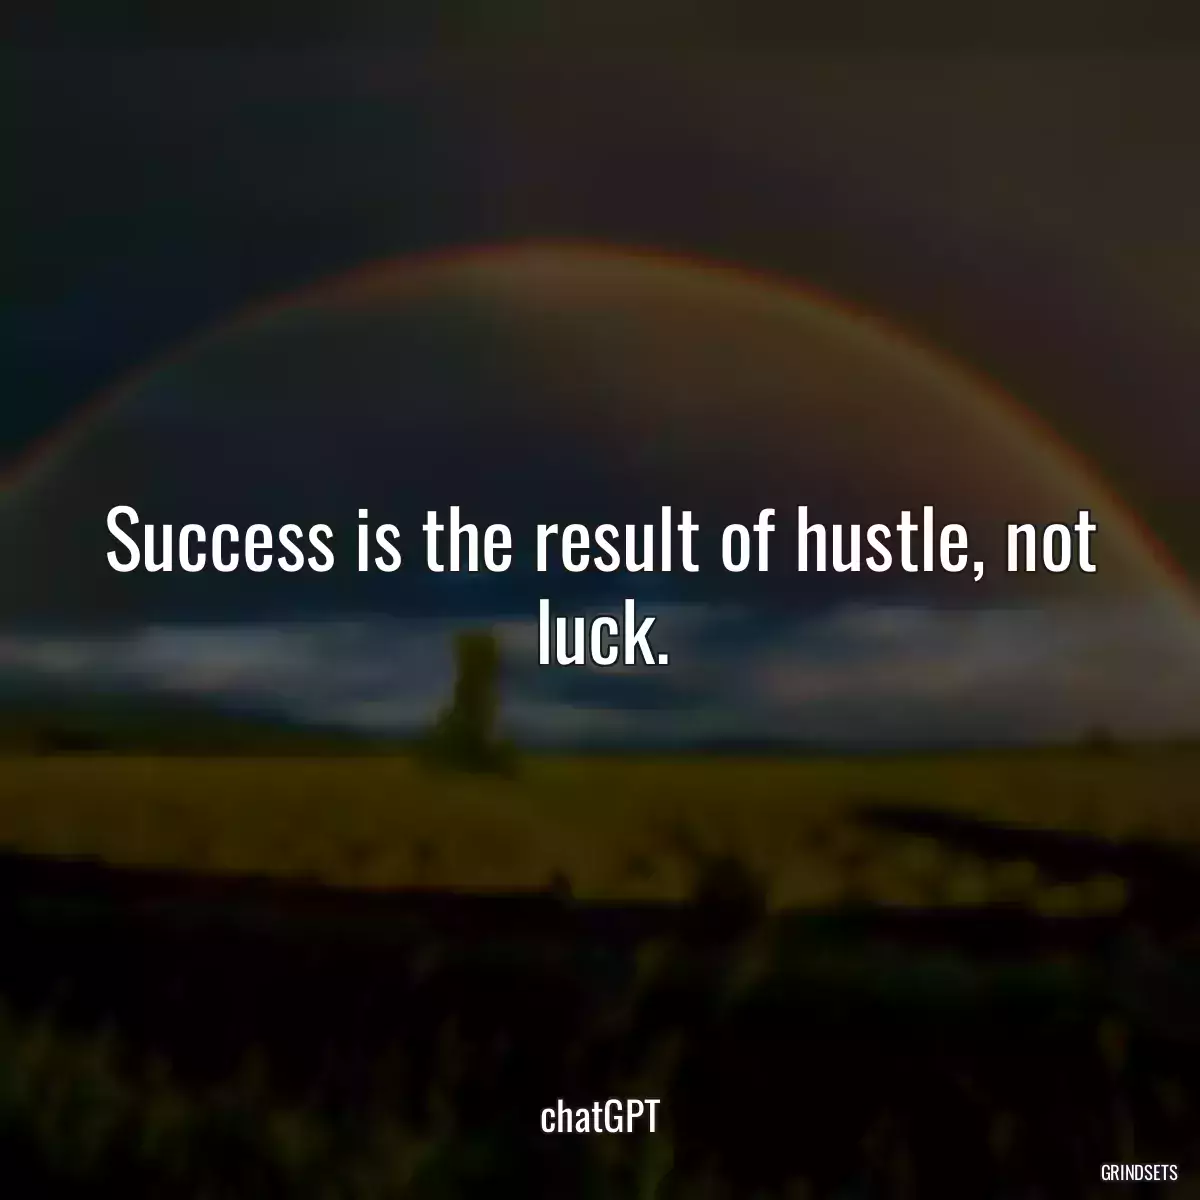 Success is the result of hustle, not luck.